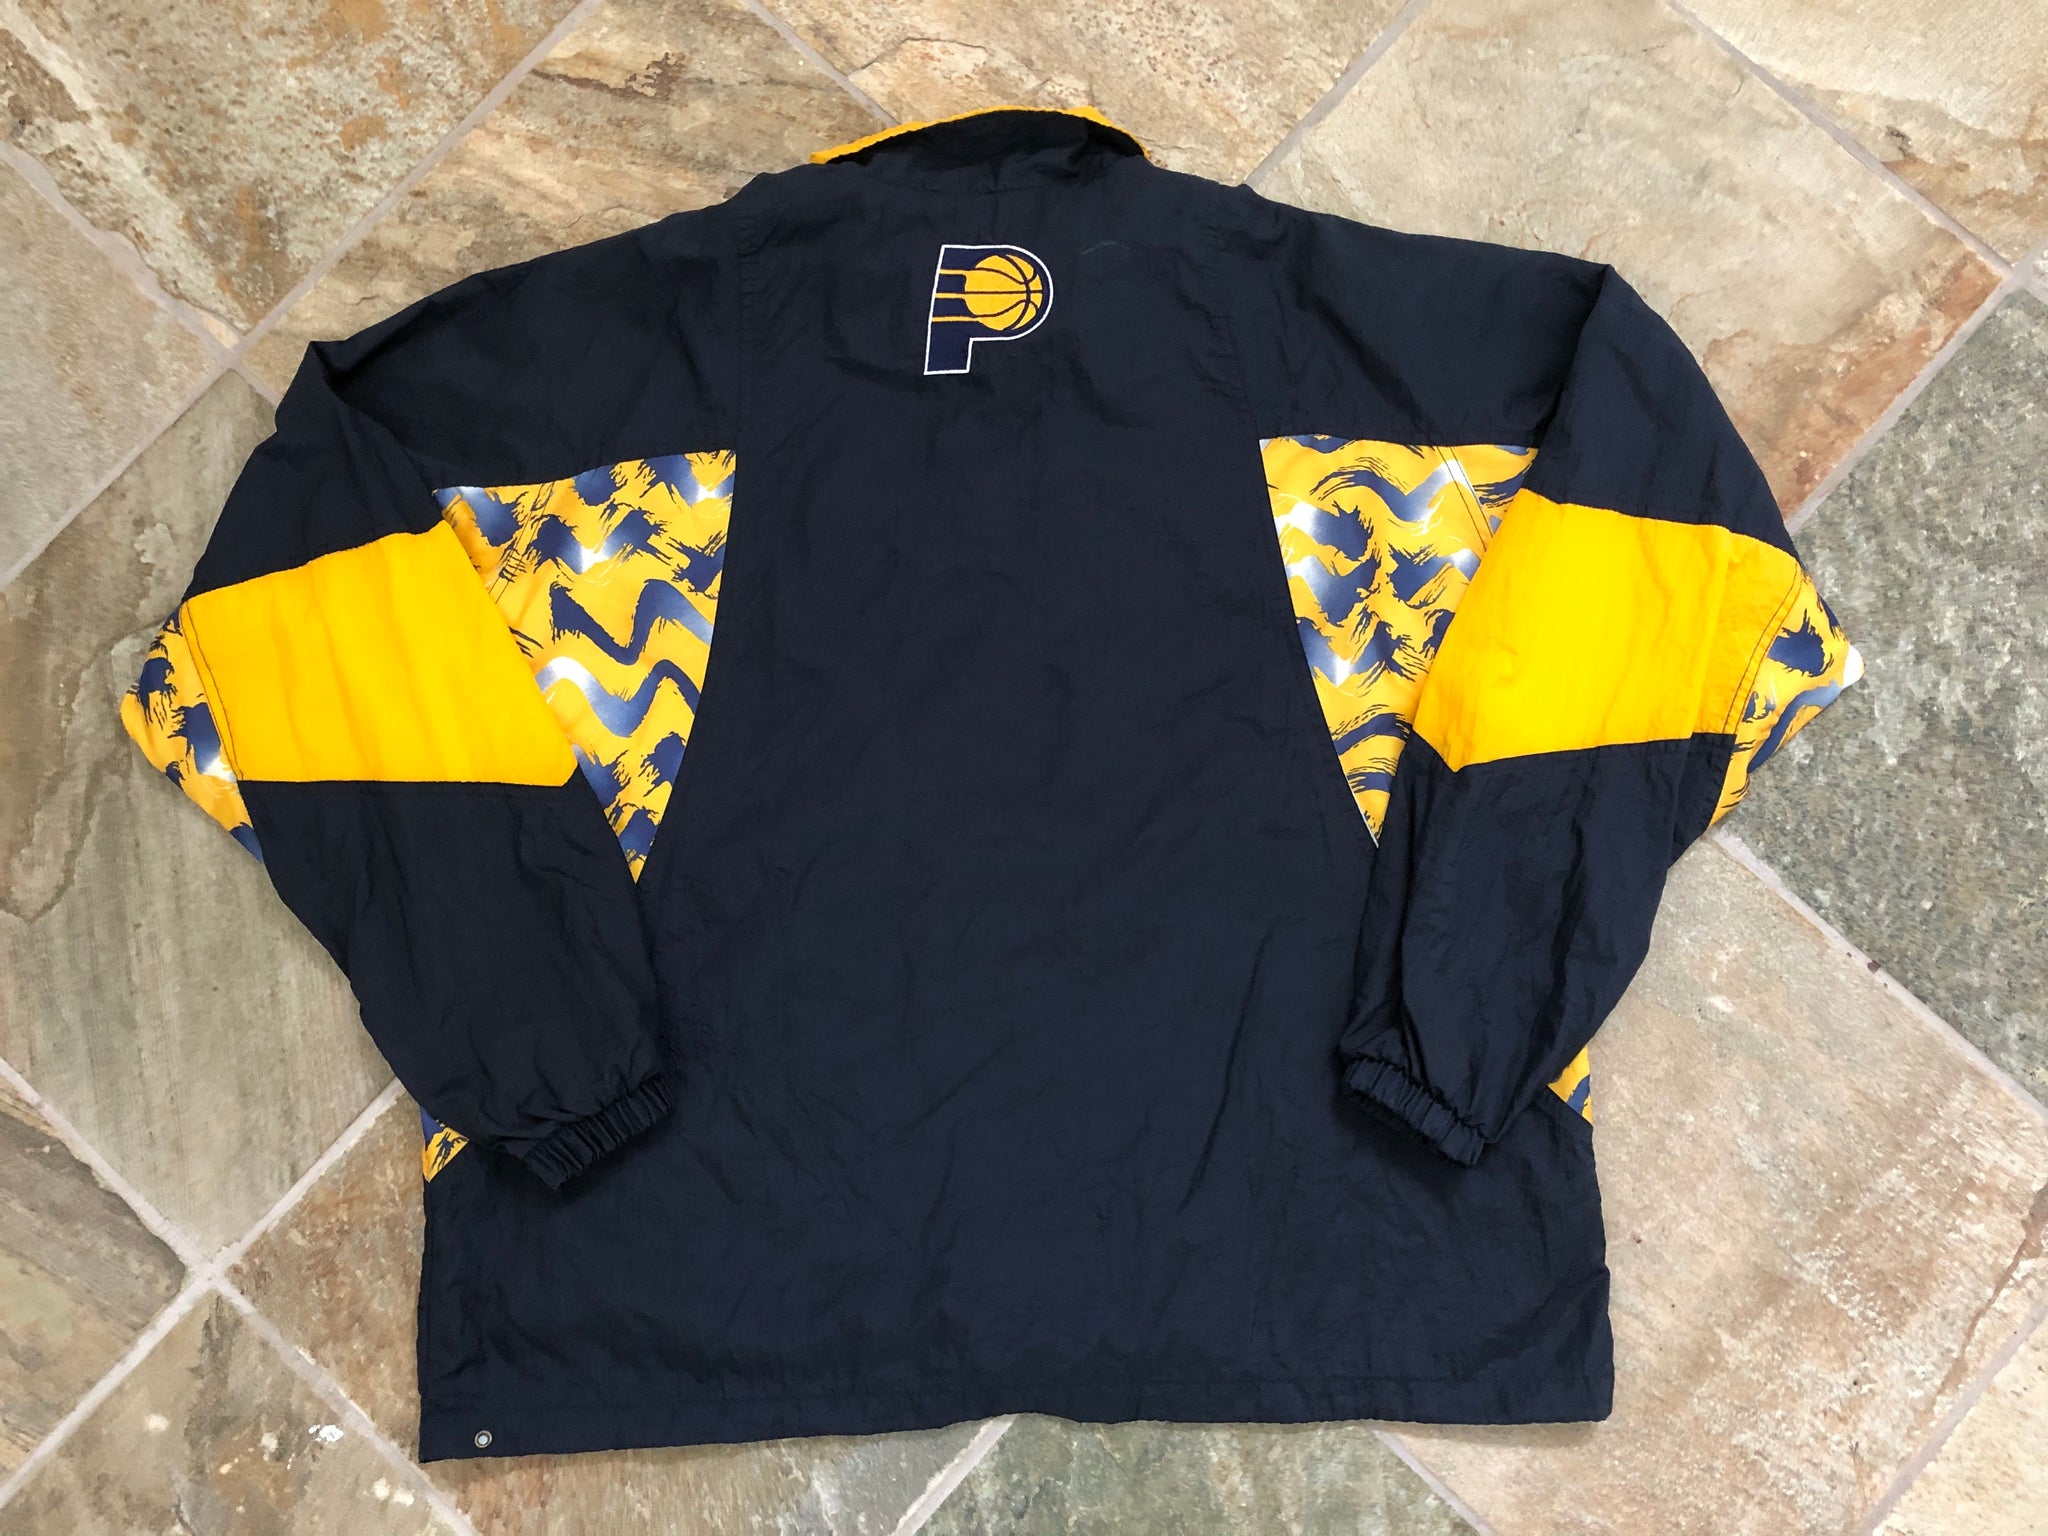 Indiana Pacers Vintage 90s Champion Warmup Jersey Shirt From Champion